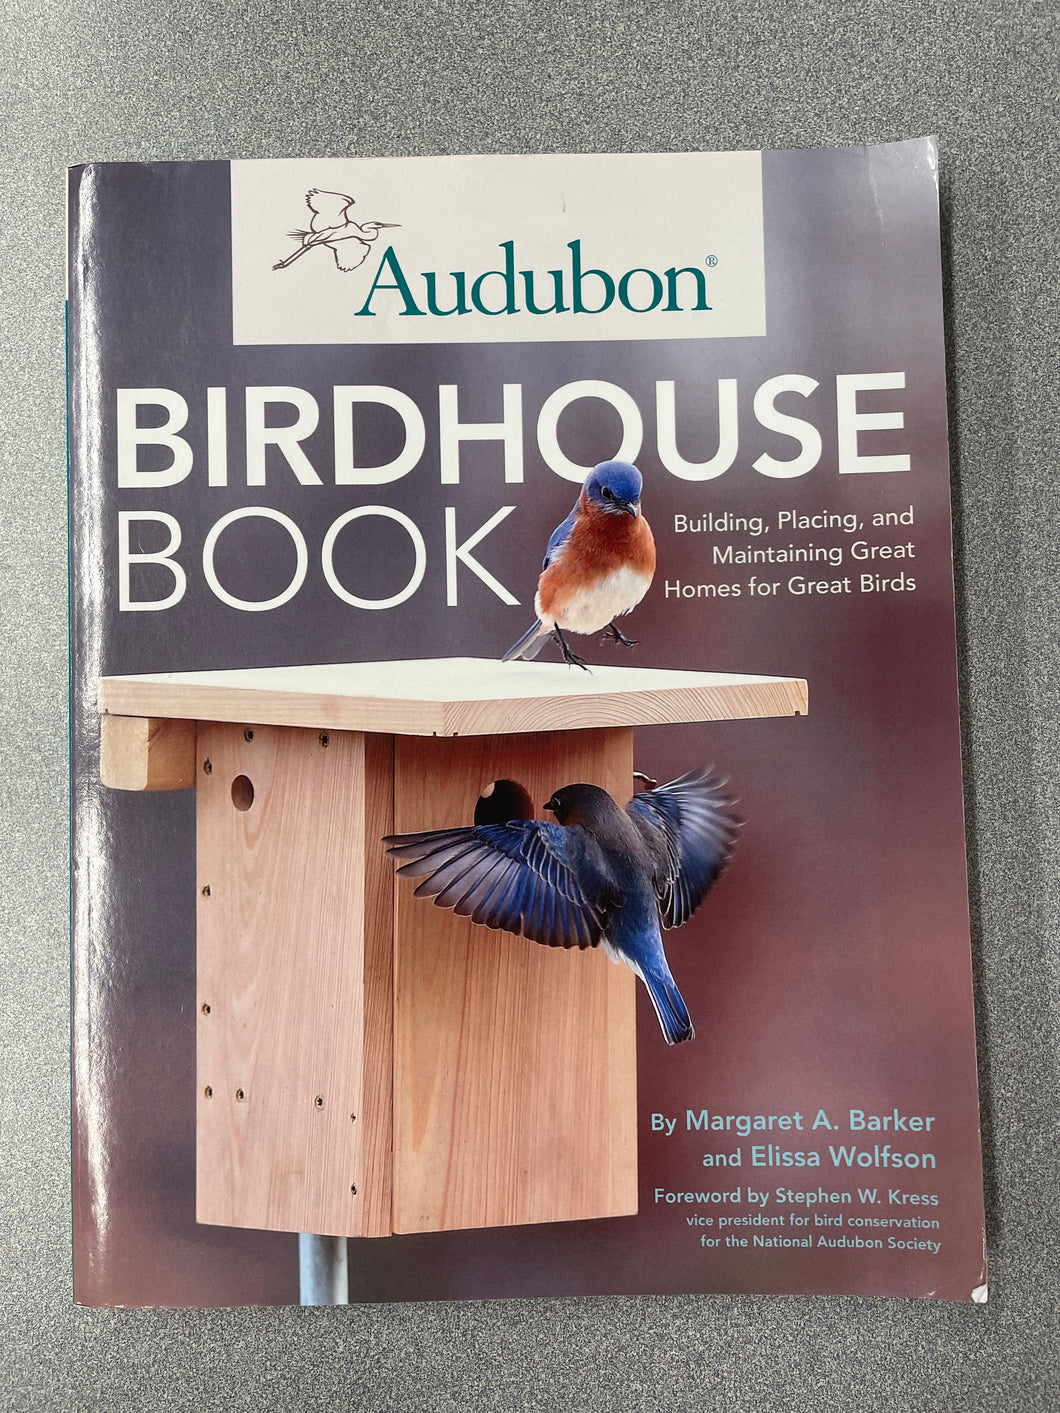 SN  Birdhouse Book: Building, Placing and Maintaining Great Homes for Great Birds, Barker, Margaret and Elissa Wolfson [2013] N 4/24